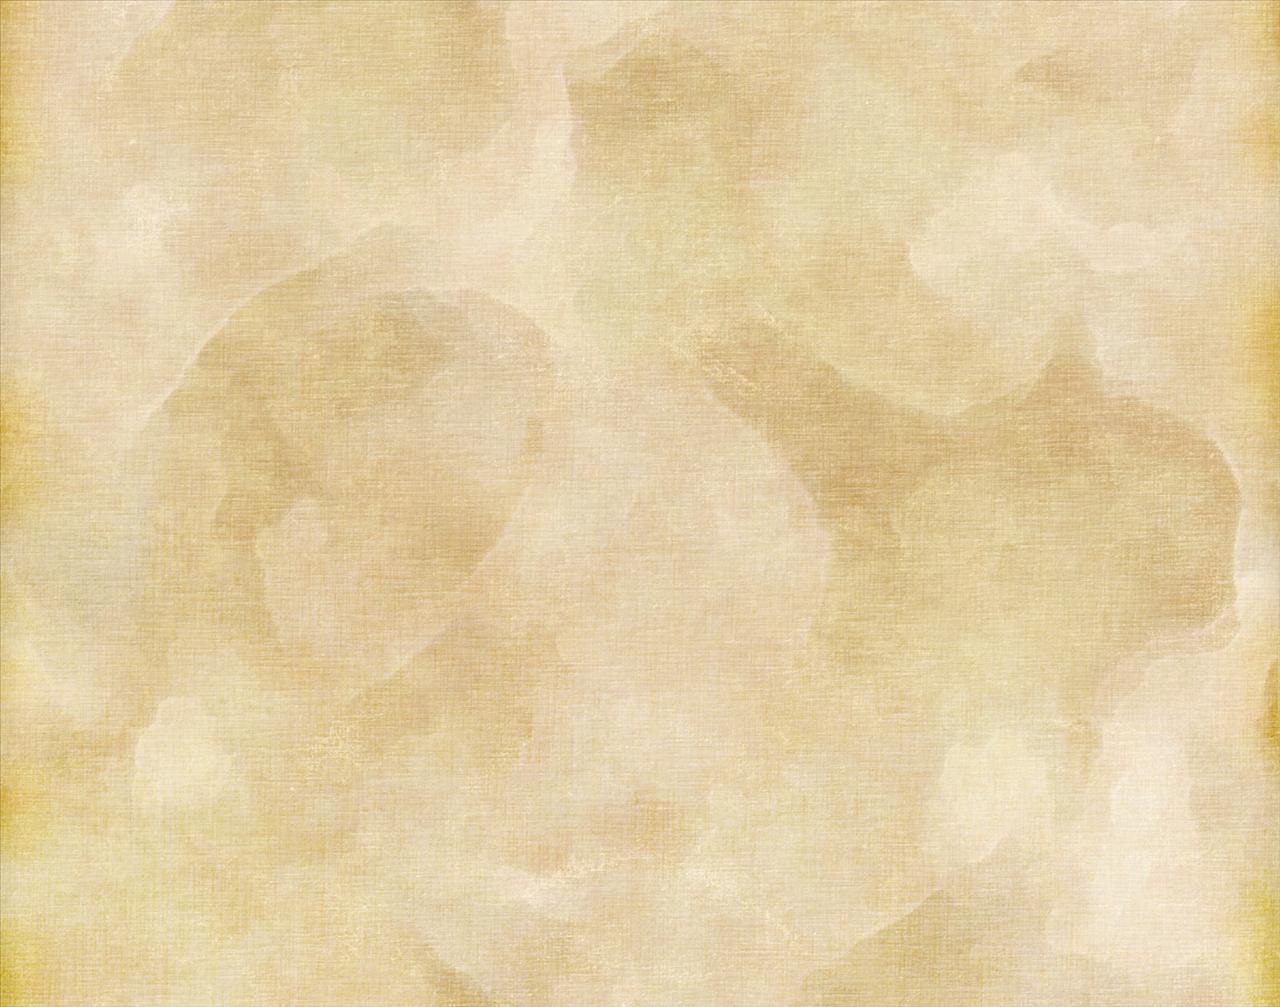 Neutral soft Background Wallpaper for PowerPoint Presentations